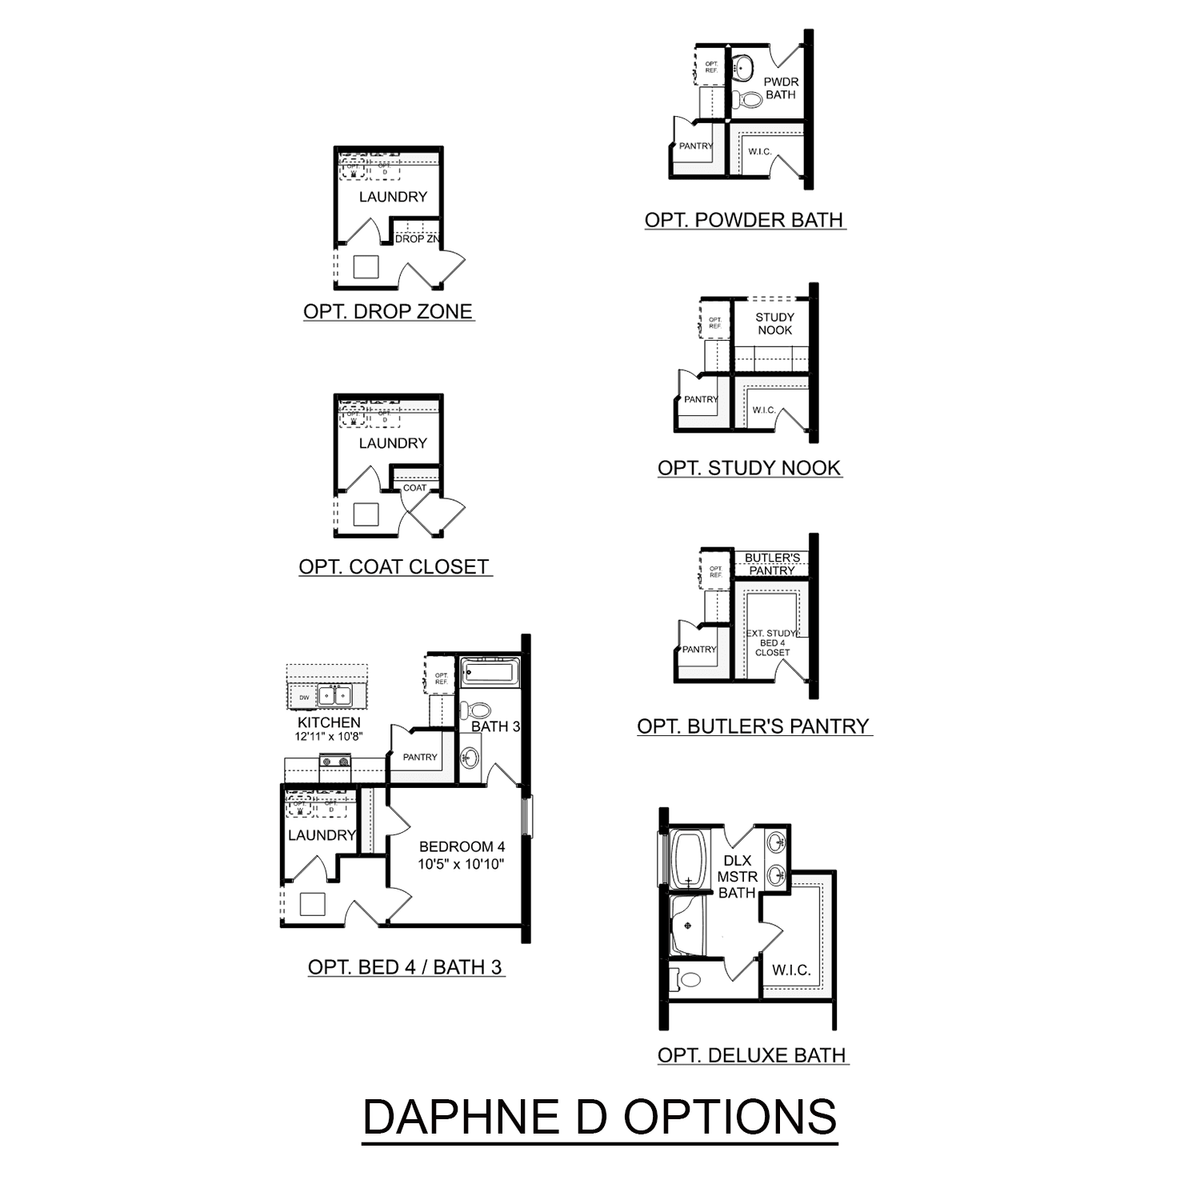 2 - The Daphne D floor plan layout for 208 Sunny Springs Court in Davidson Homes' Flint Meadows community.